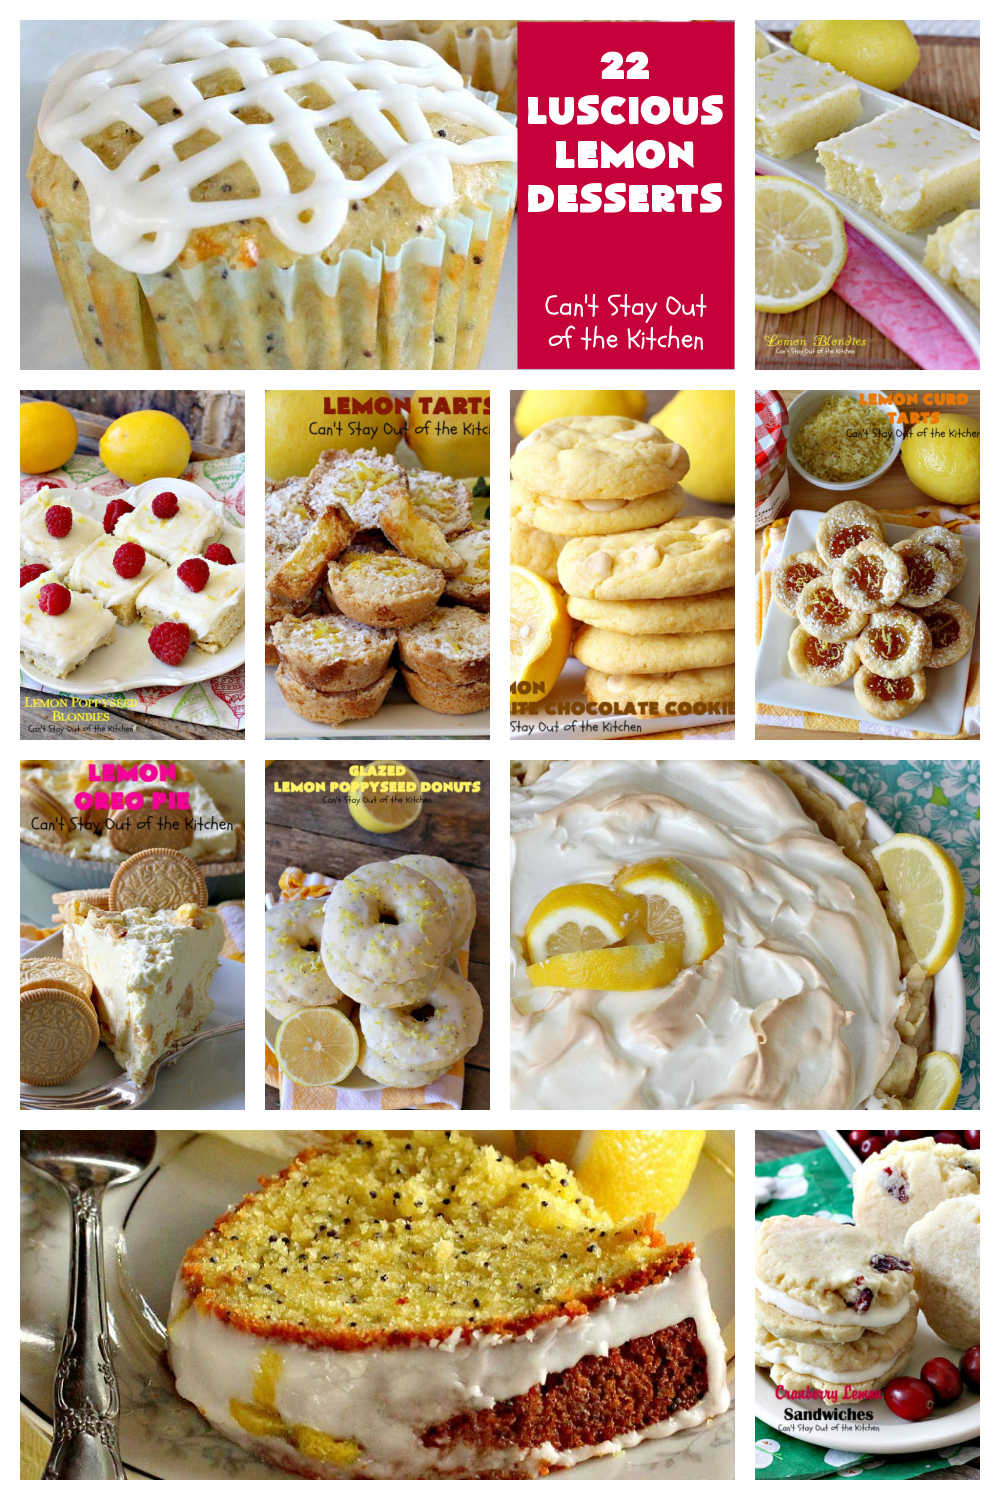 22 Luscious Lemon Desserts | Can't Stay Out of the Kitchen | 22 fabulous #lemon flavored #desserts & #muffin #recipes. Includes #pies, #cakes, #cookies & #blondies. If you have a lemon sweet tooth, these terrific desserts are for you!